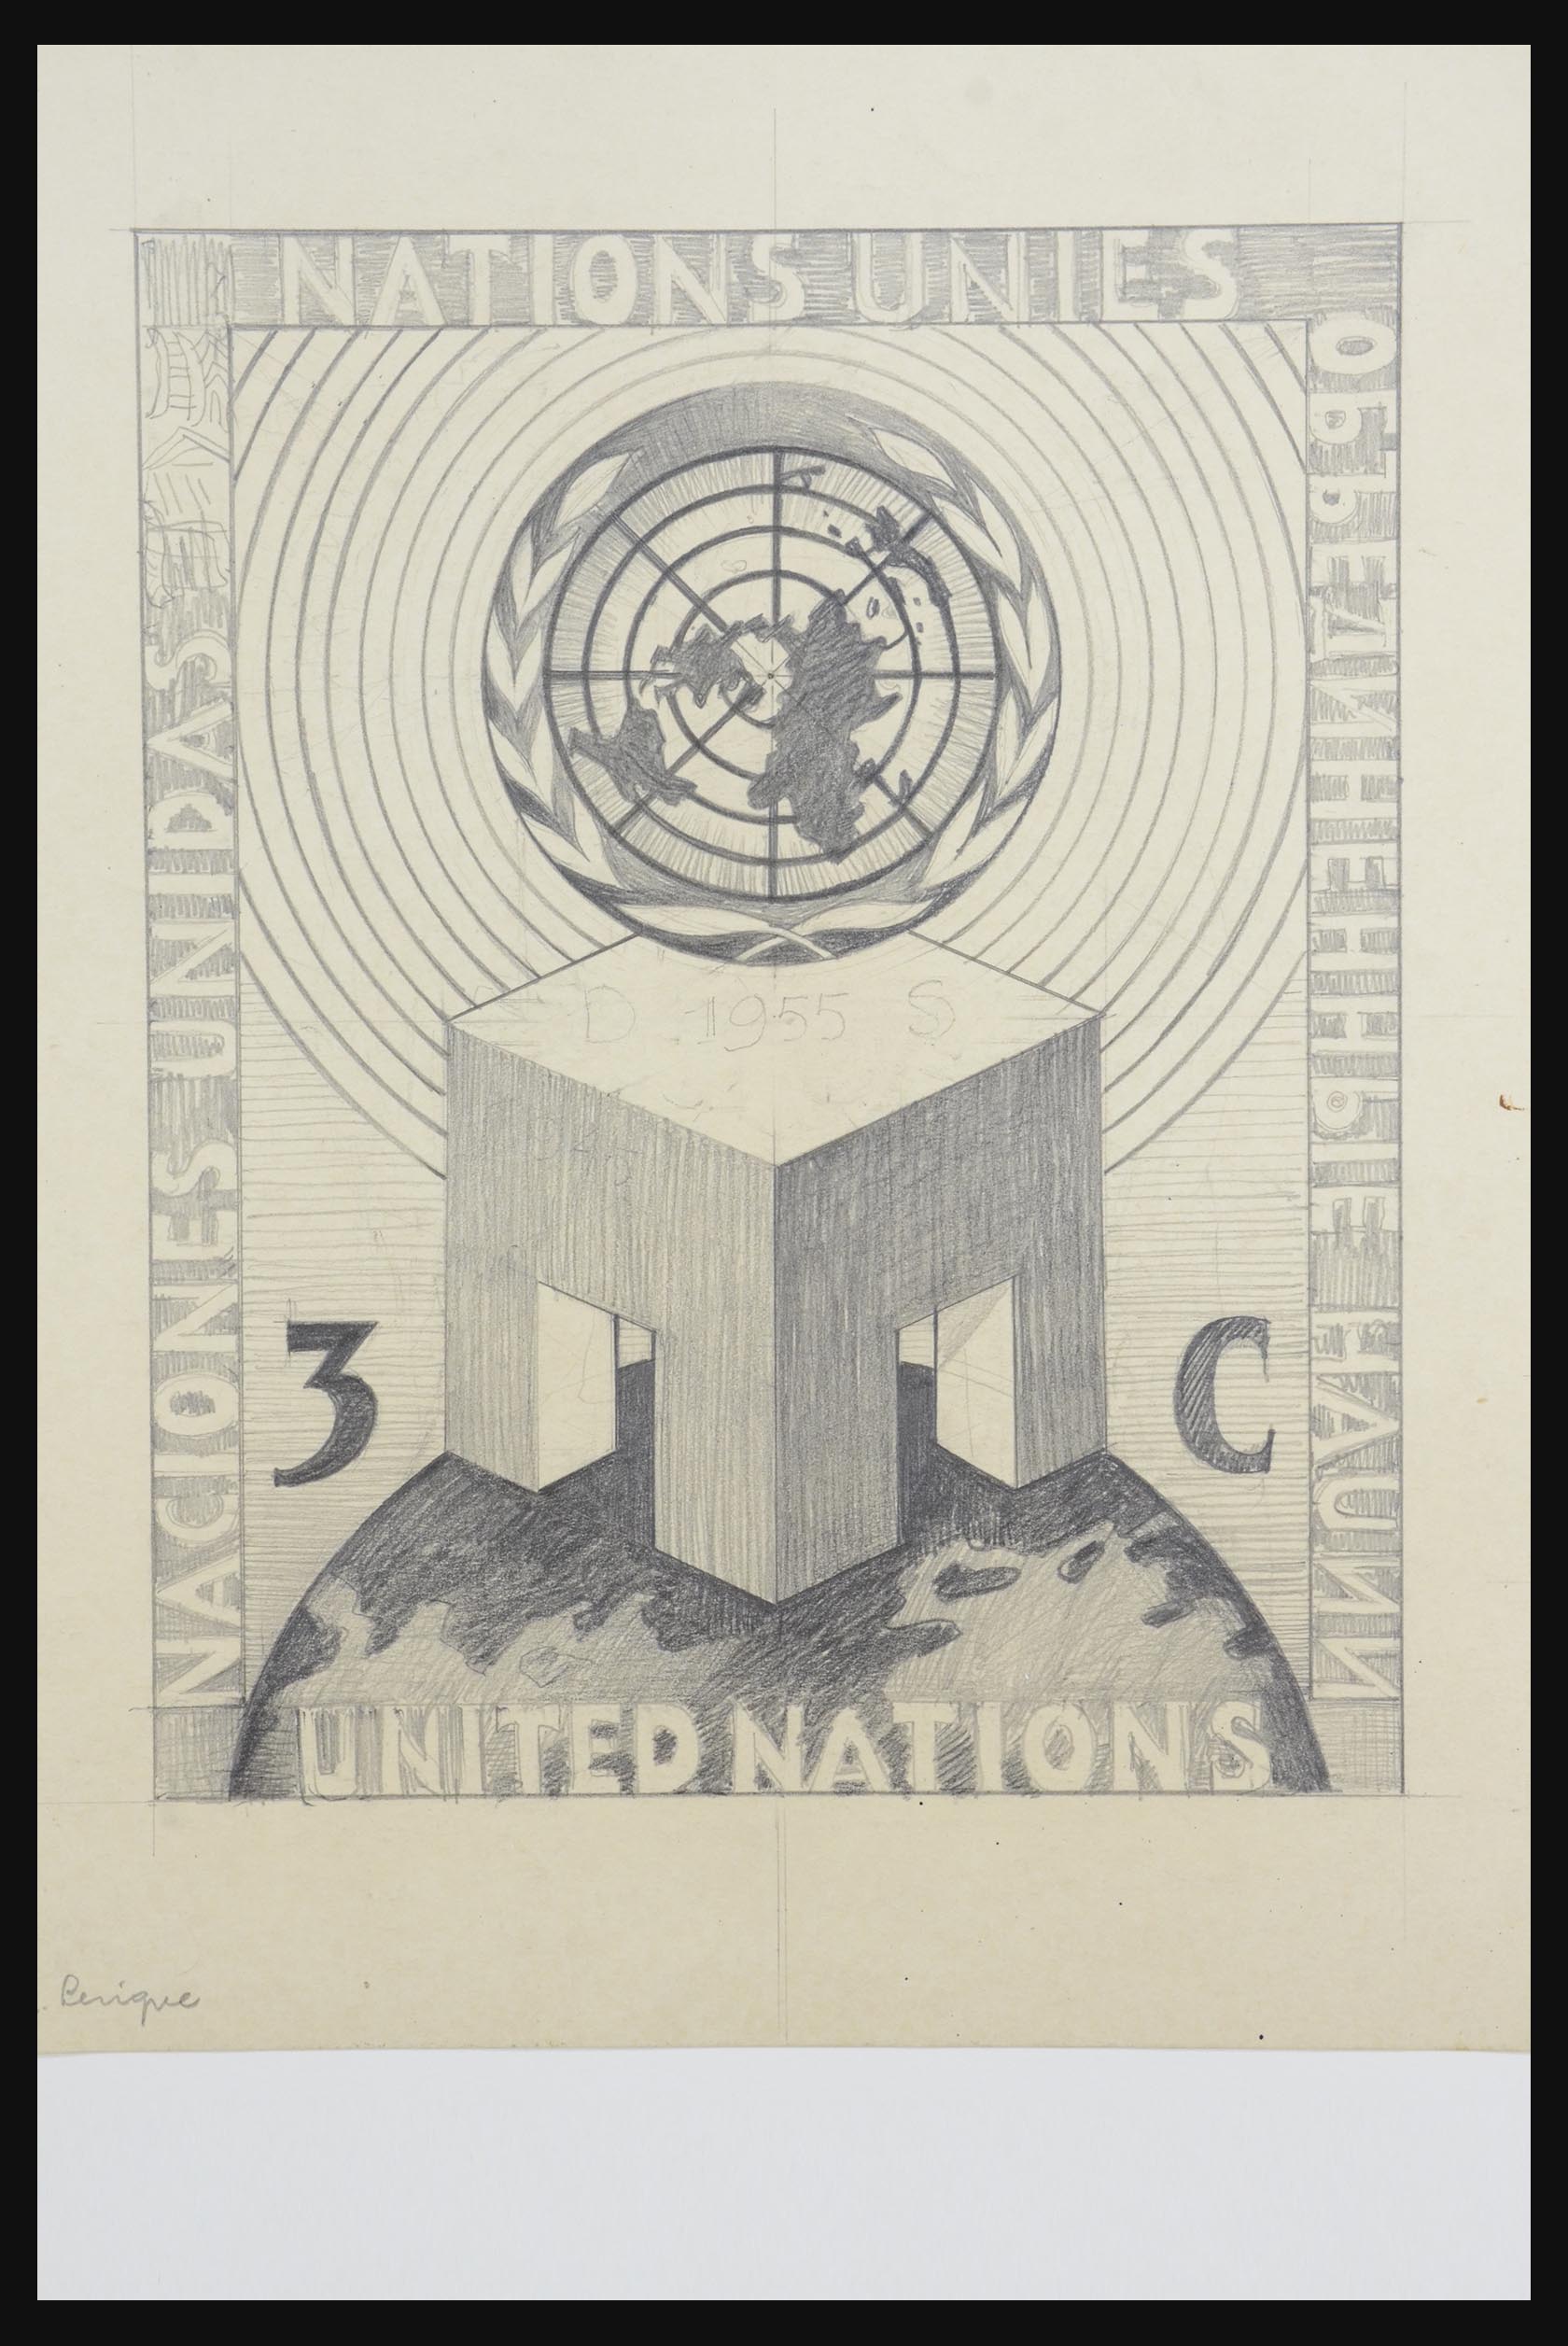 32348 007 - 32348 United Nations New York designs.